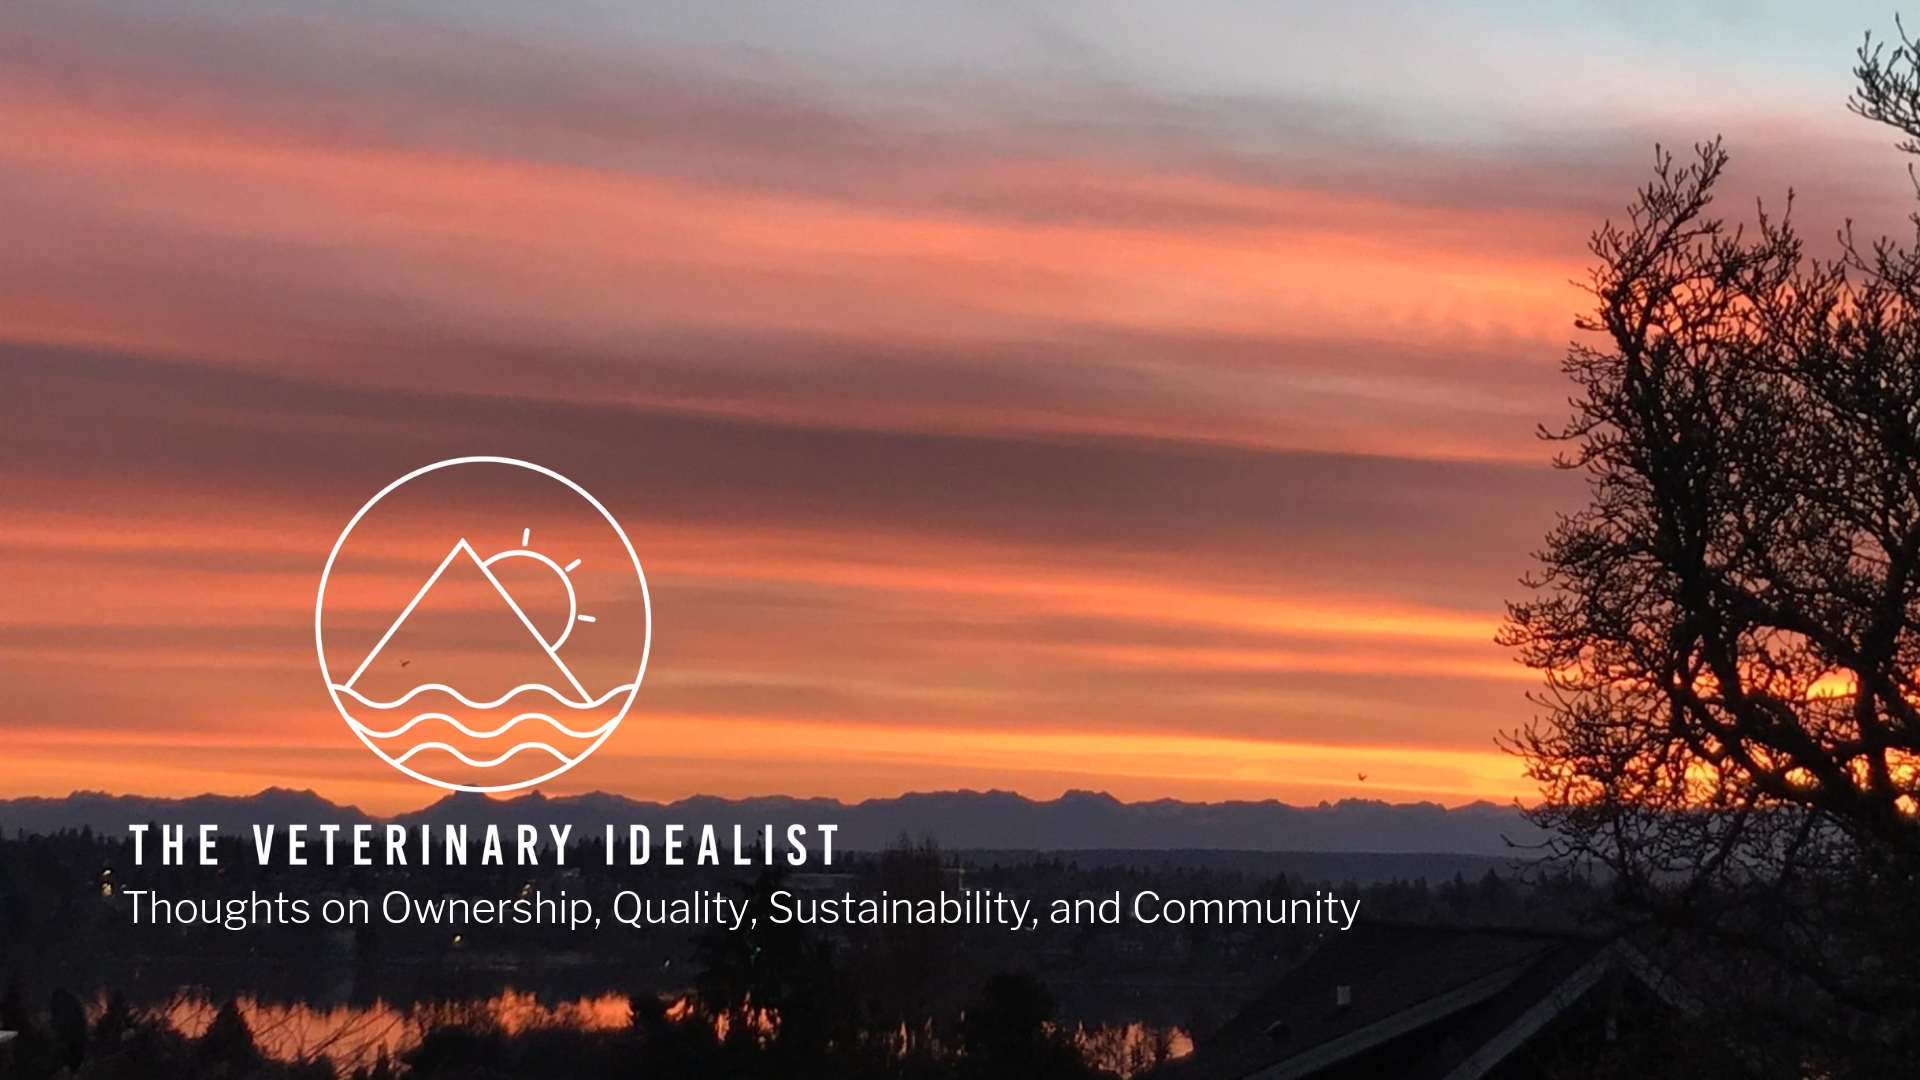 The Veterinary Idealist — Thoughts on Ownership, Quality, Sustainability, and Community